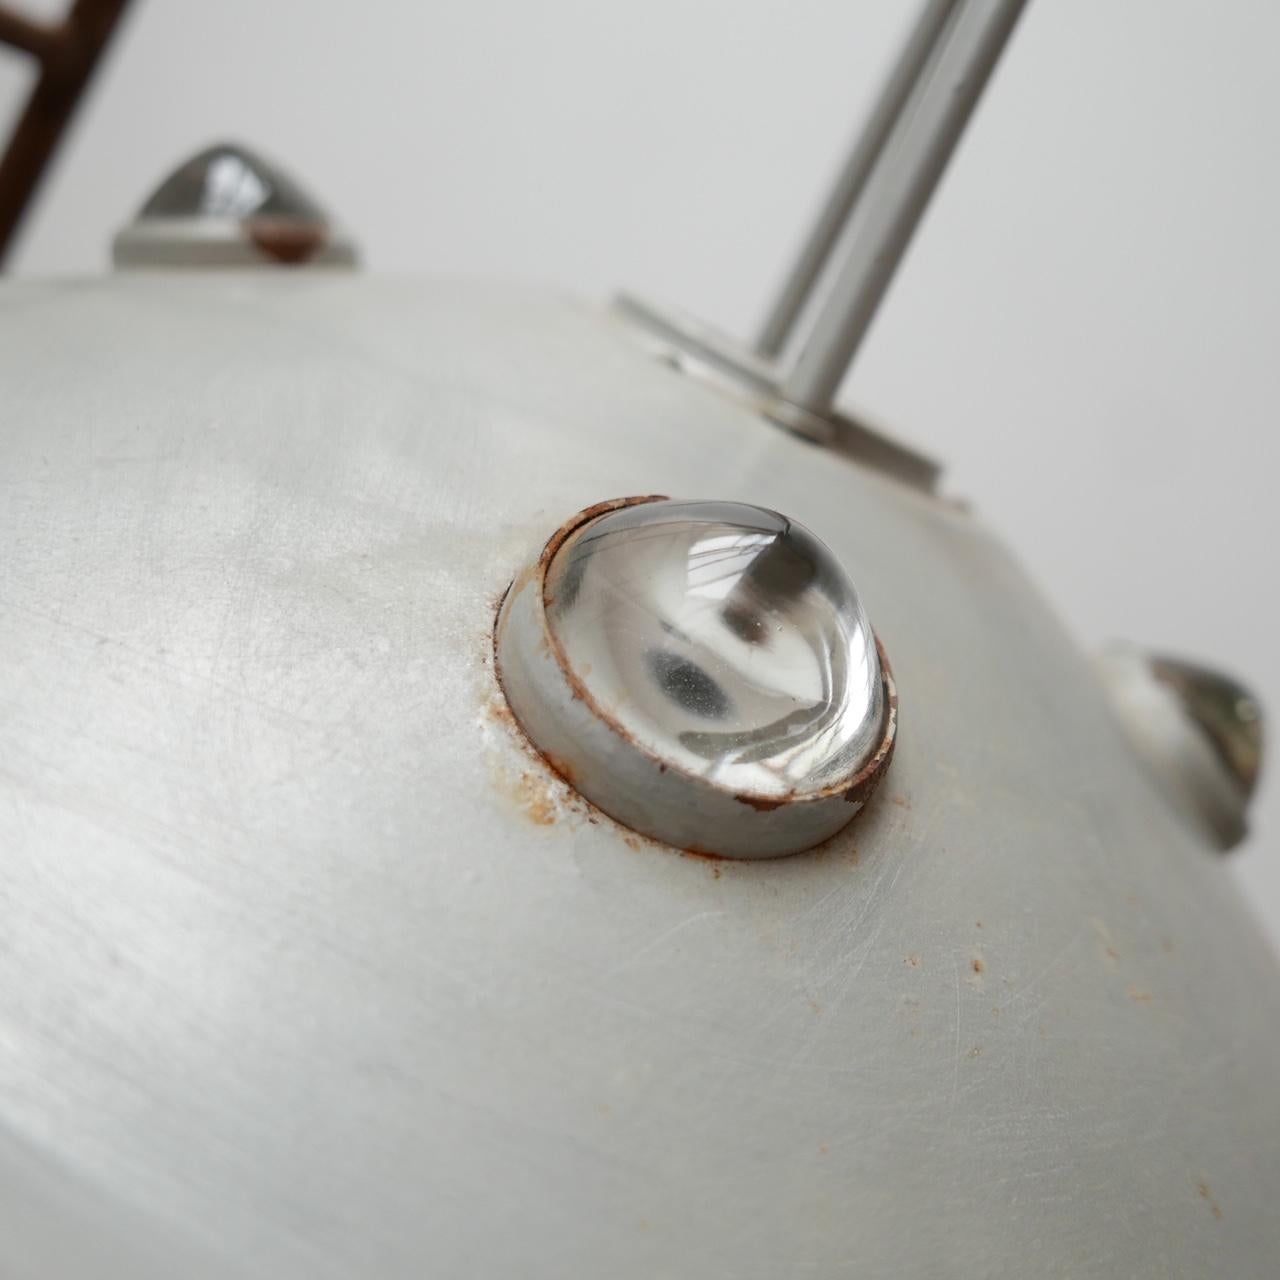 A very scarce run of industrial pendant lights in the form of flying saucers. 

Originally from a factory in England. 

There are four glass roundels to the top and one large one to the base to diffuse light. 

We have never seen a lighting